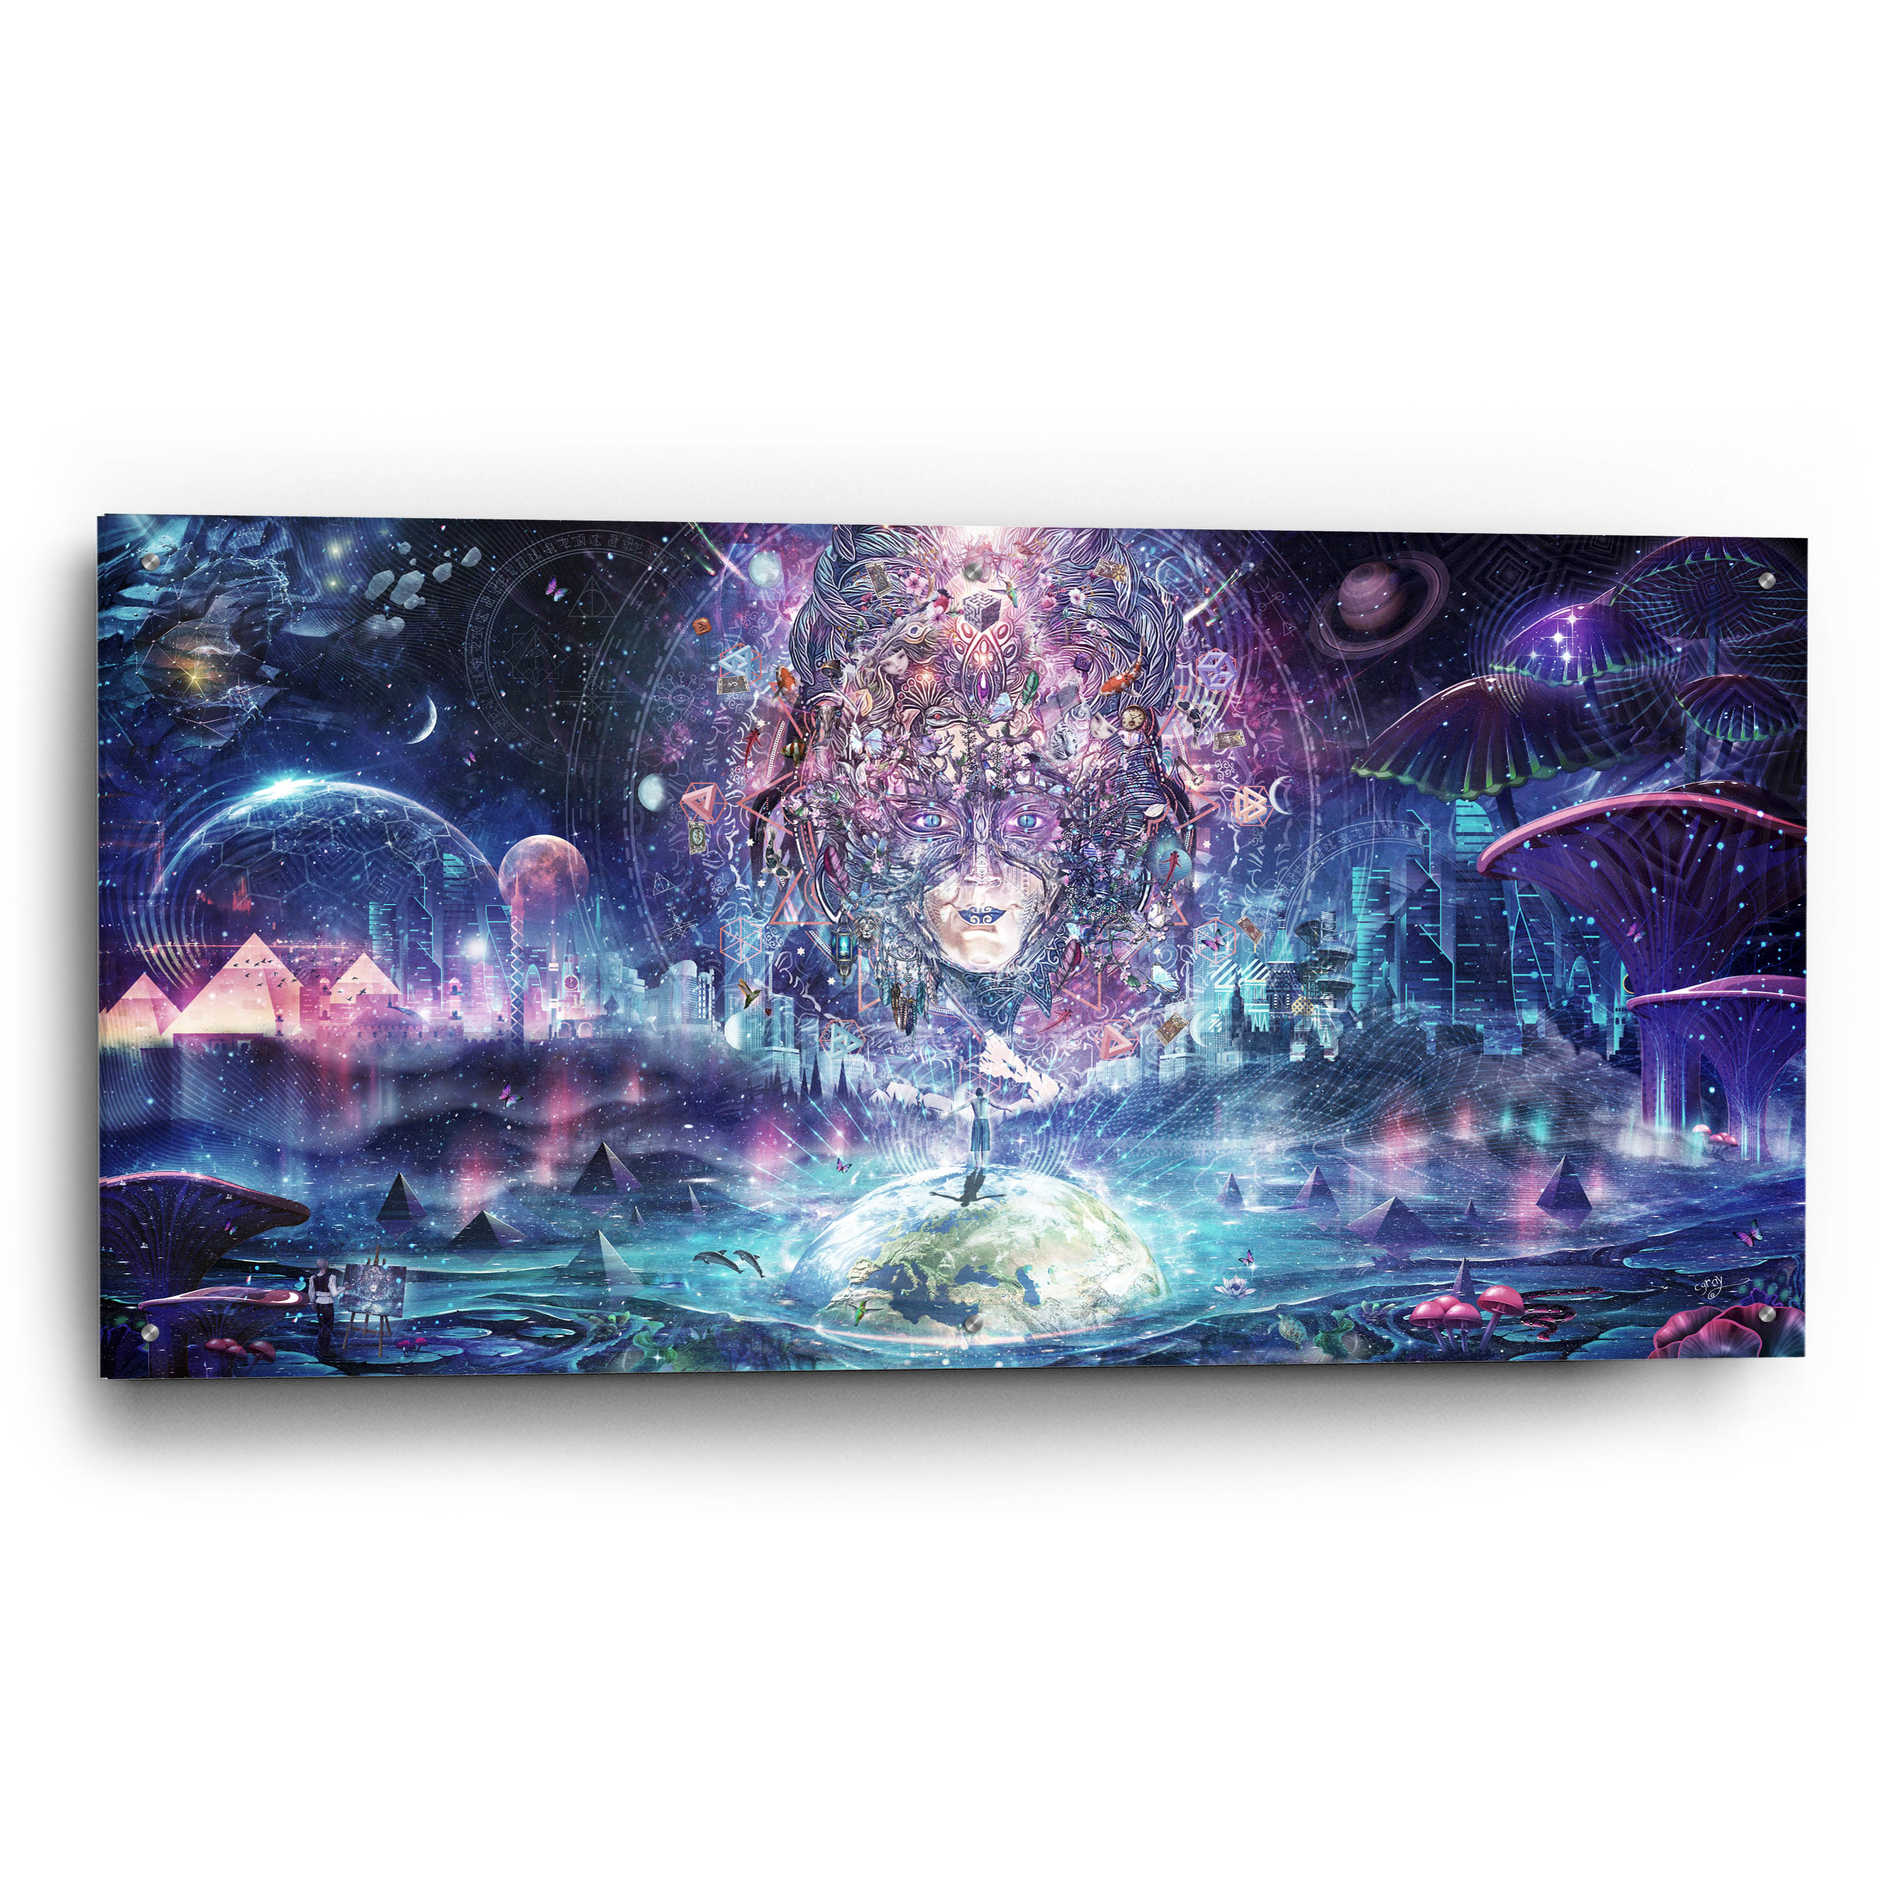 Epic Art 'Quest for the Peak Experience' by Cameron Gray, Acrylic Glass Wall Art,48x24